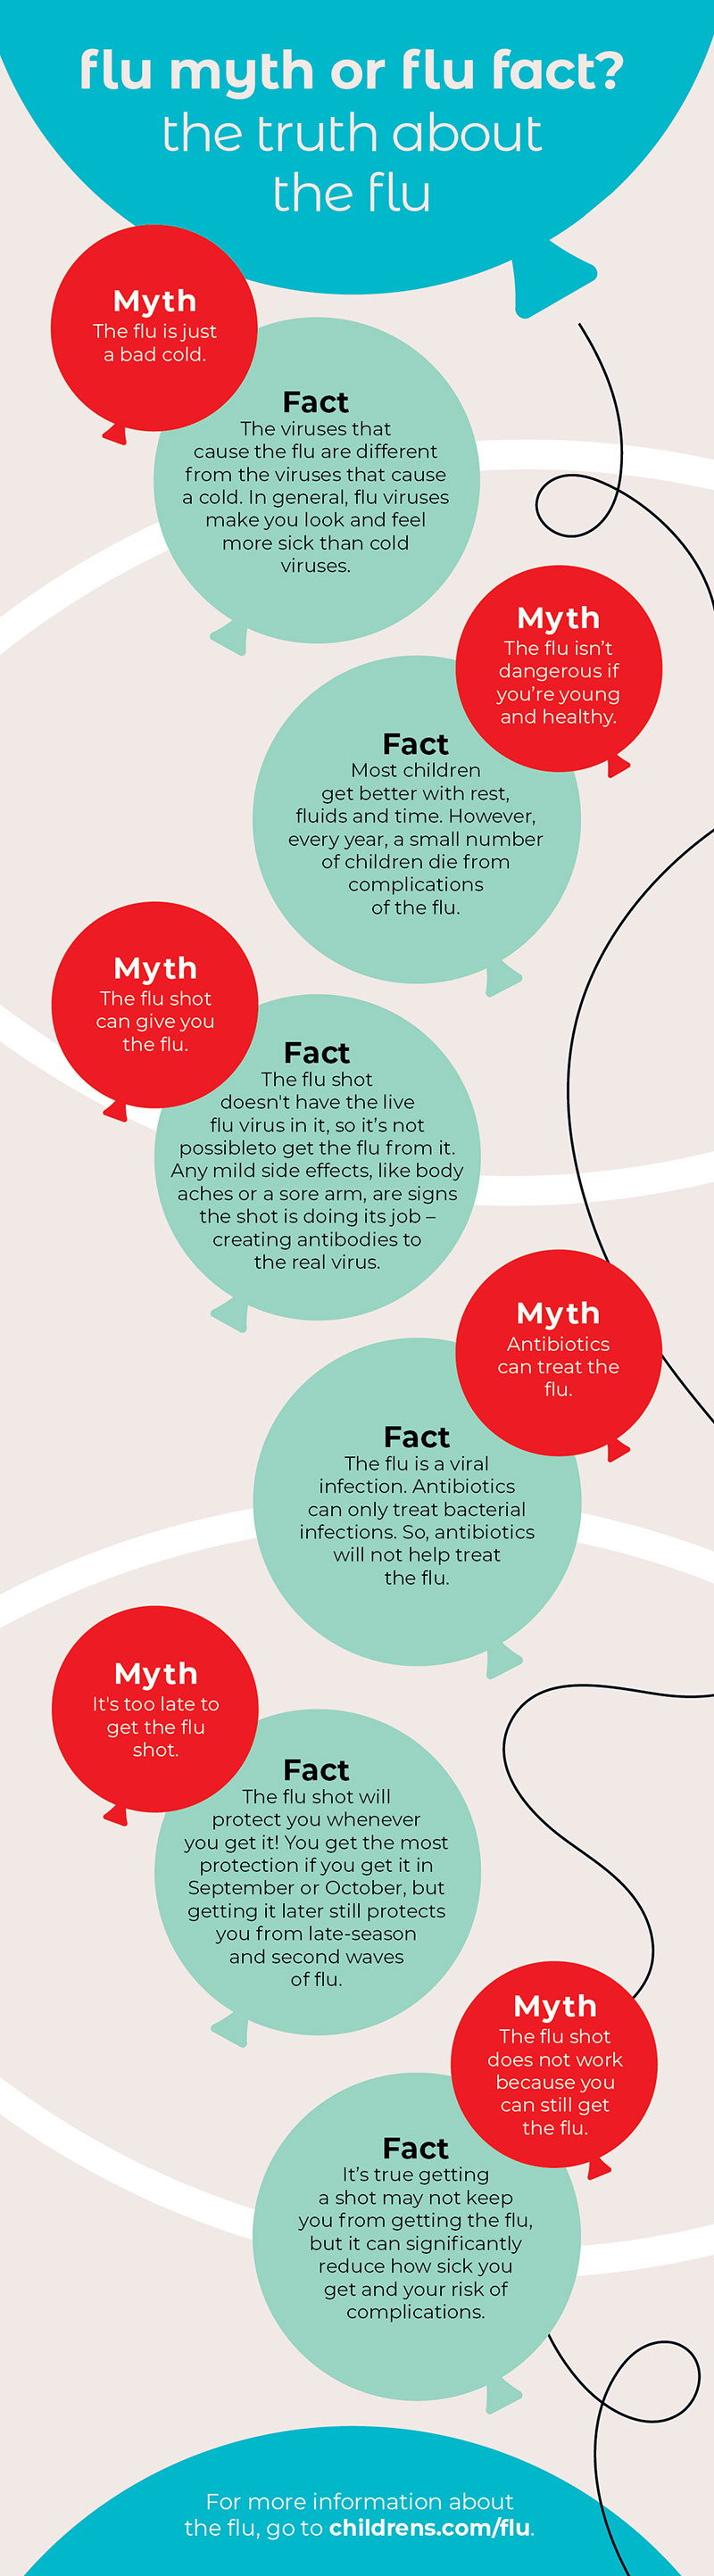 The truth about the flu infographic